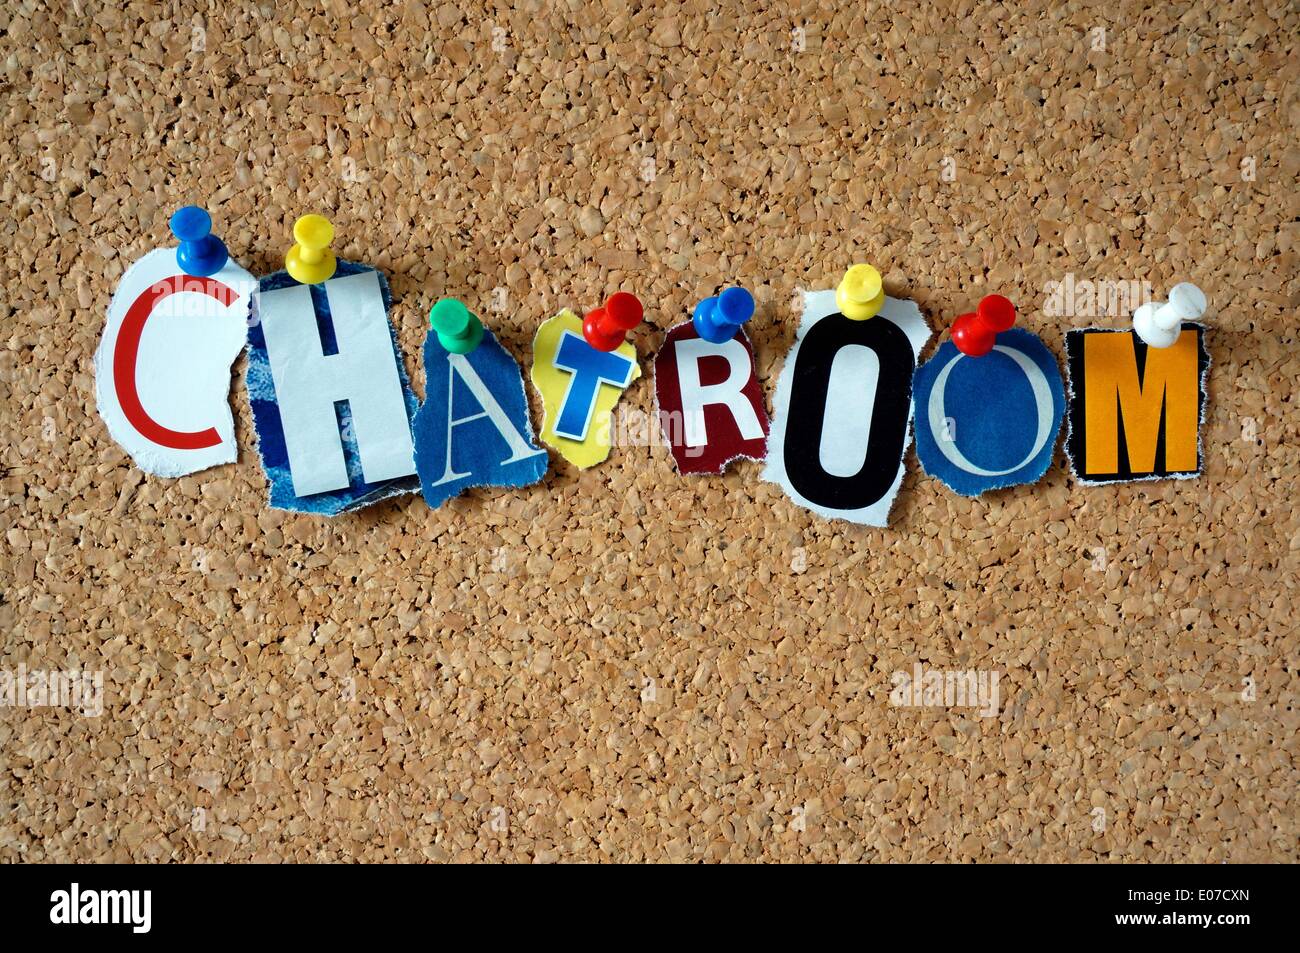 Illustration - The word 'Chatroom' made of cut-out newspaper letters hangs on a bulletin board, 22 November 2013. Fotoarchiv für Zeitgeschichte - NO WIRE SERVICE Stock Photo